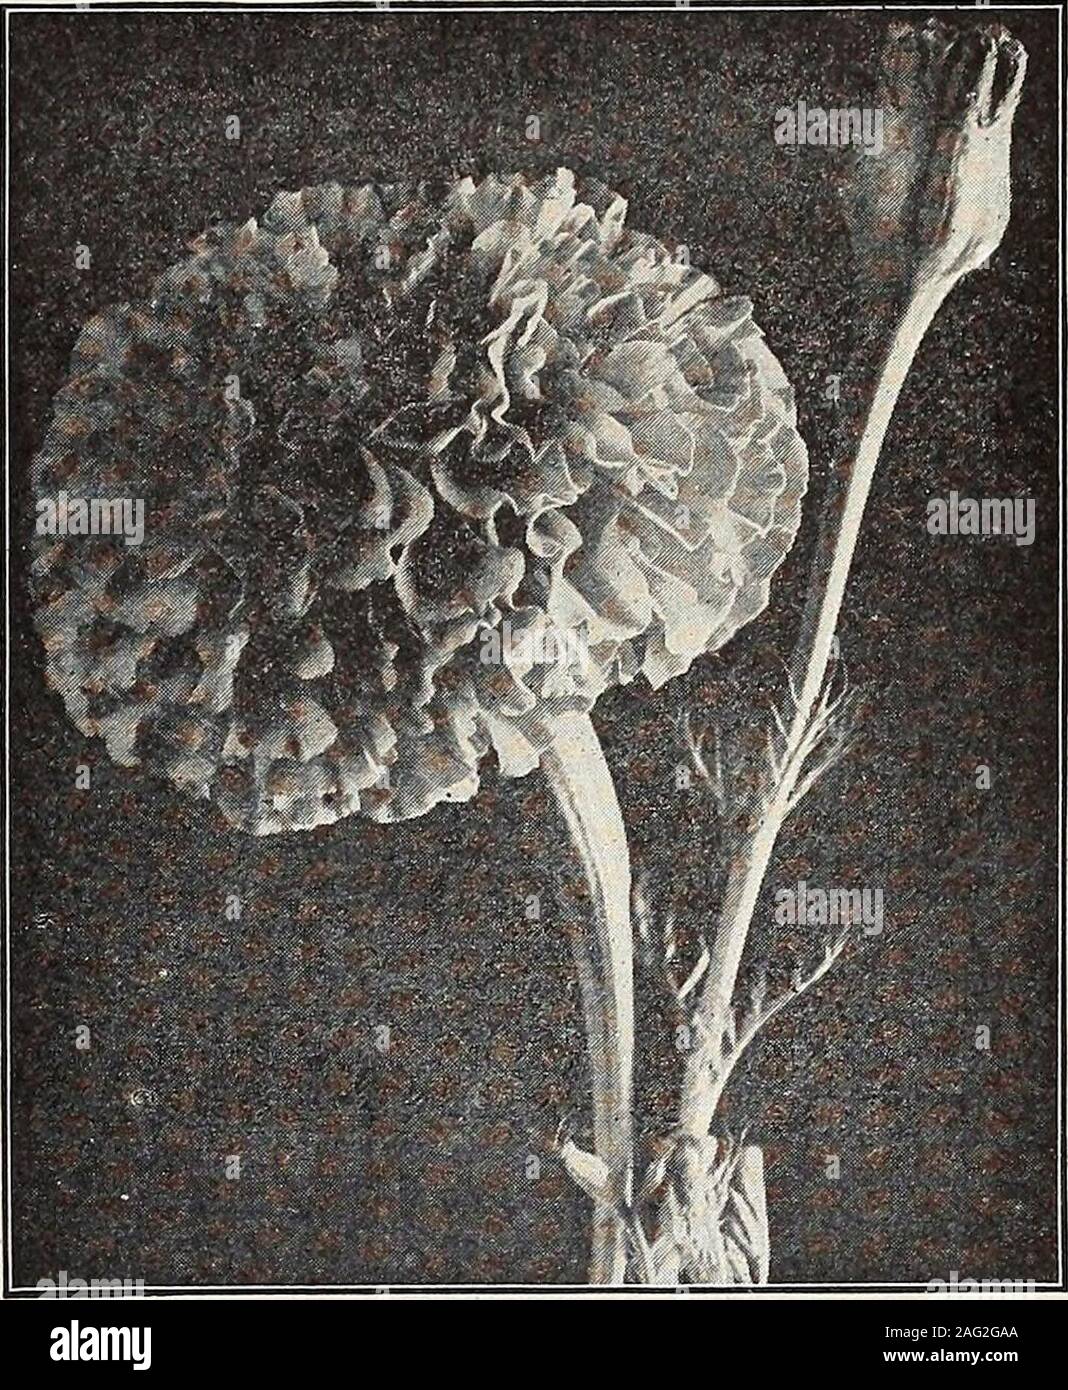 . Seed annual 1913. onof pure white flowers; useful for borders Pkt. 10c. Crystal Palace. Most graceful and very desirable for borders,having bright deep blue flowers; very dark green foli-age Pkt. 5c. Gracilis. The flowers are bright blue with small whitecenters, fine for baskets and vases, trailing gracefully andblooming profusely. Plants six inches high Pkt. 5c. Tenuior. Intensely blue flowers, decidedly larger than theother sorts and with unusually long stems. Very desirablefor outdoor bedding and cutting. Plants upright growing,about one foot high Pkt. 10c. LONDON PRIDE—(See Lychnis Chalc Stock Photo